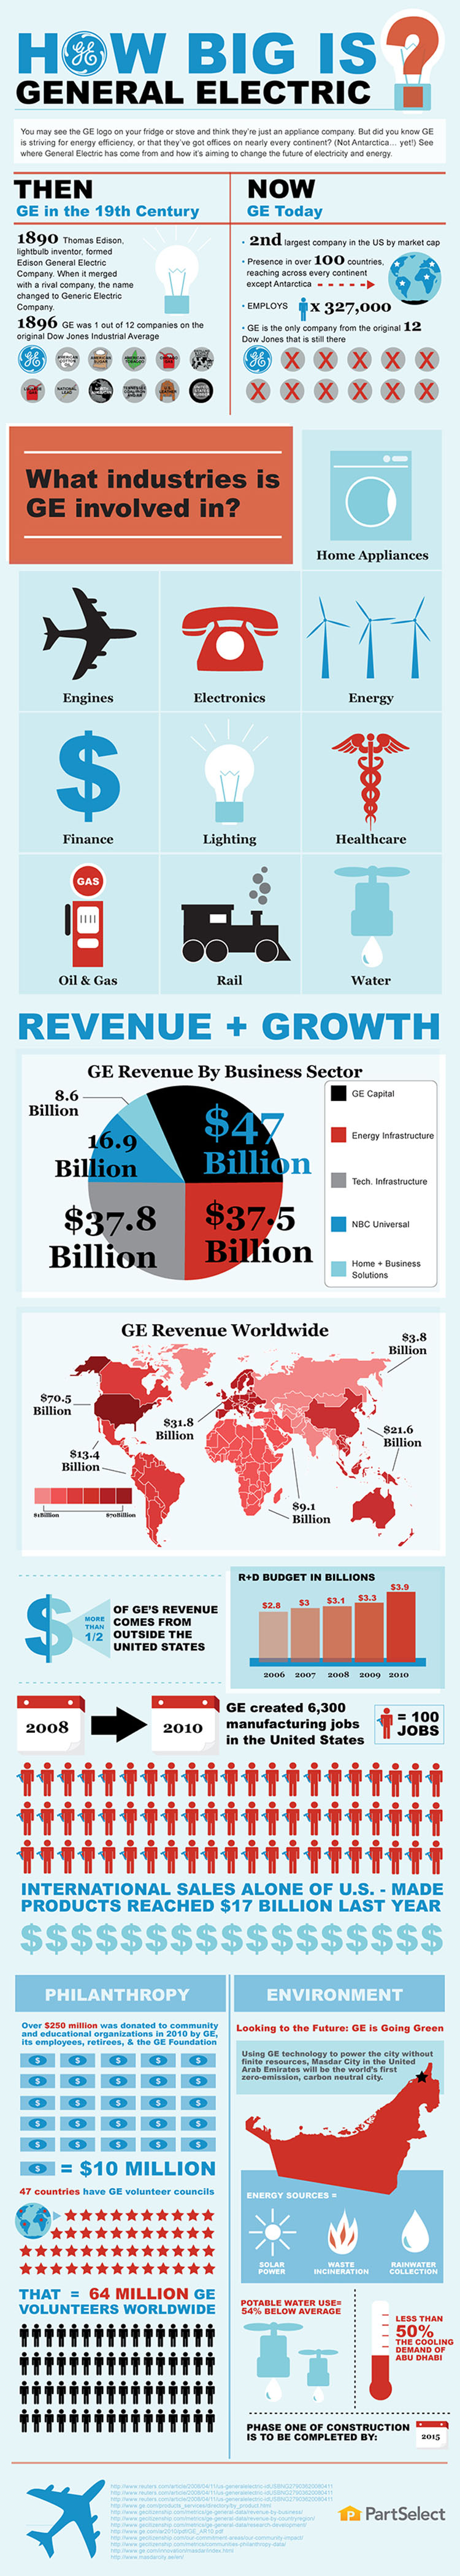 How Big is General Electric?